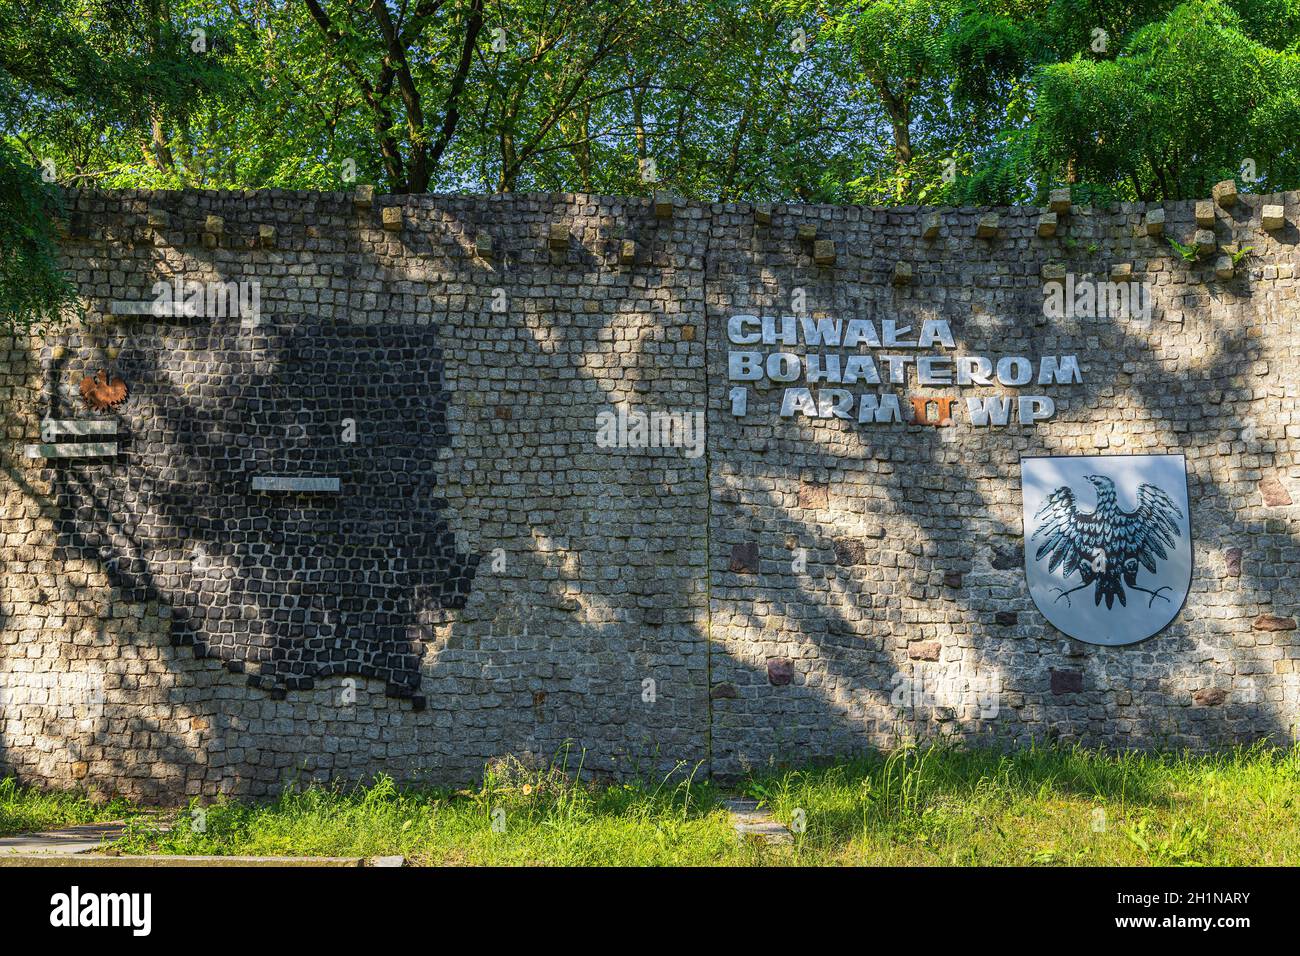 Stare Lysogorki, Poland, June 2019 Memorial and remembrance wall for soldiers and their sacrifice, from 1st Polish Army which participated in the cros Stock Photo